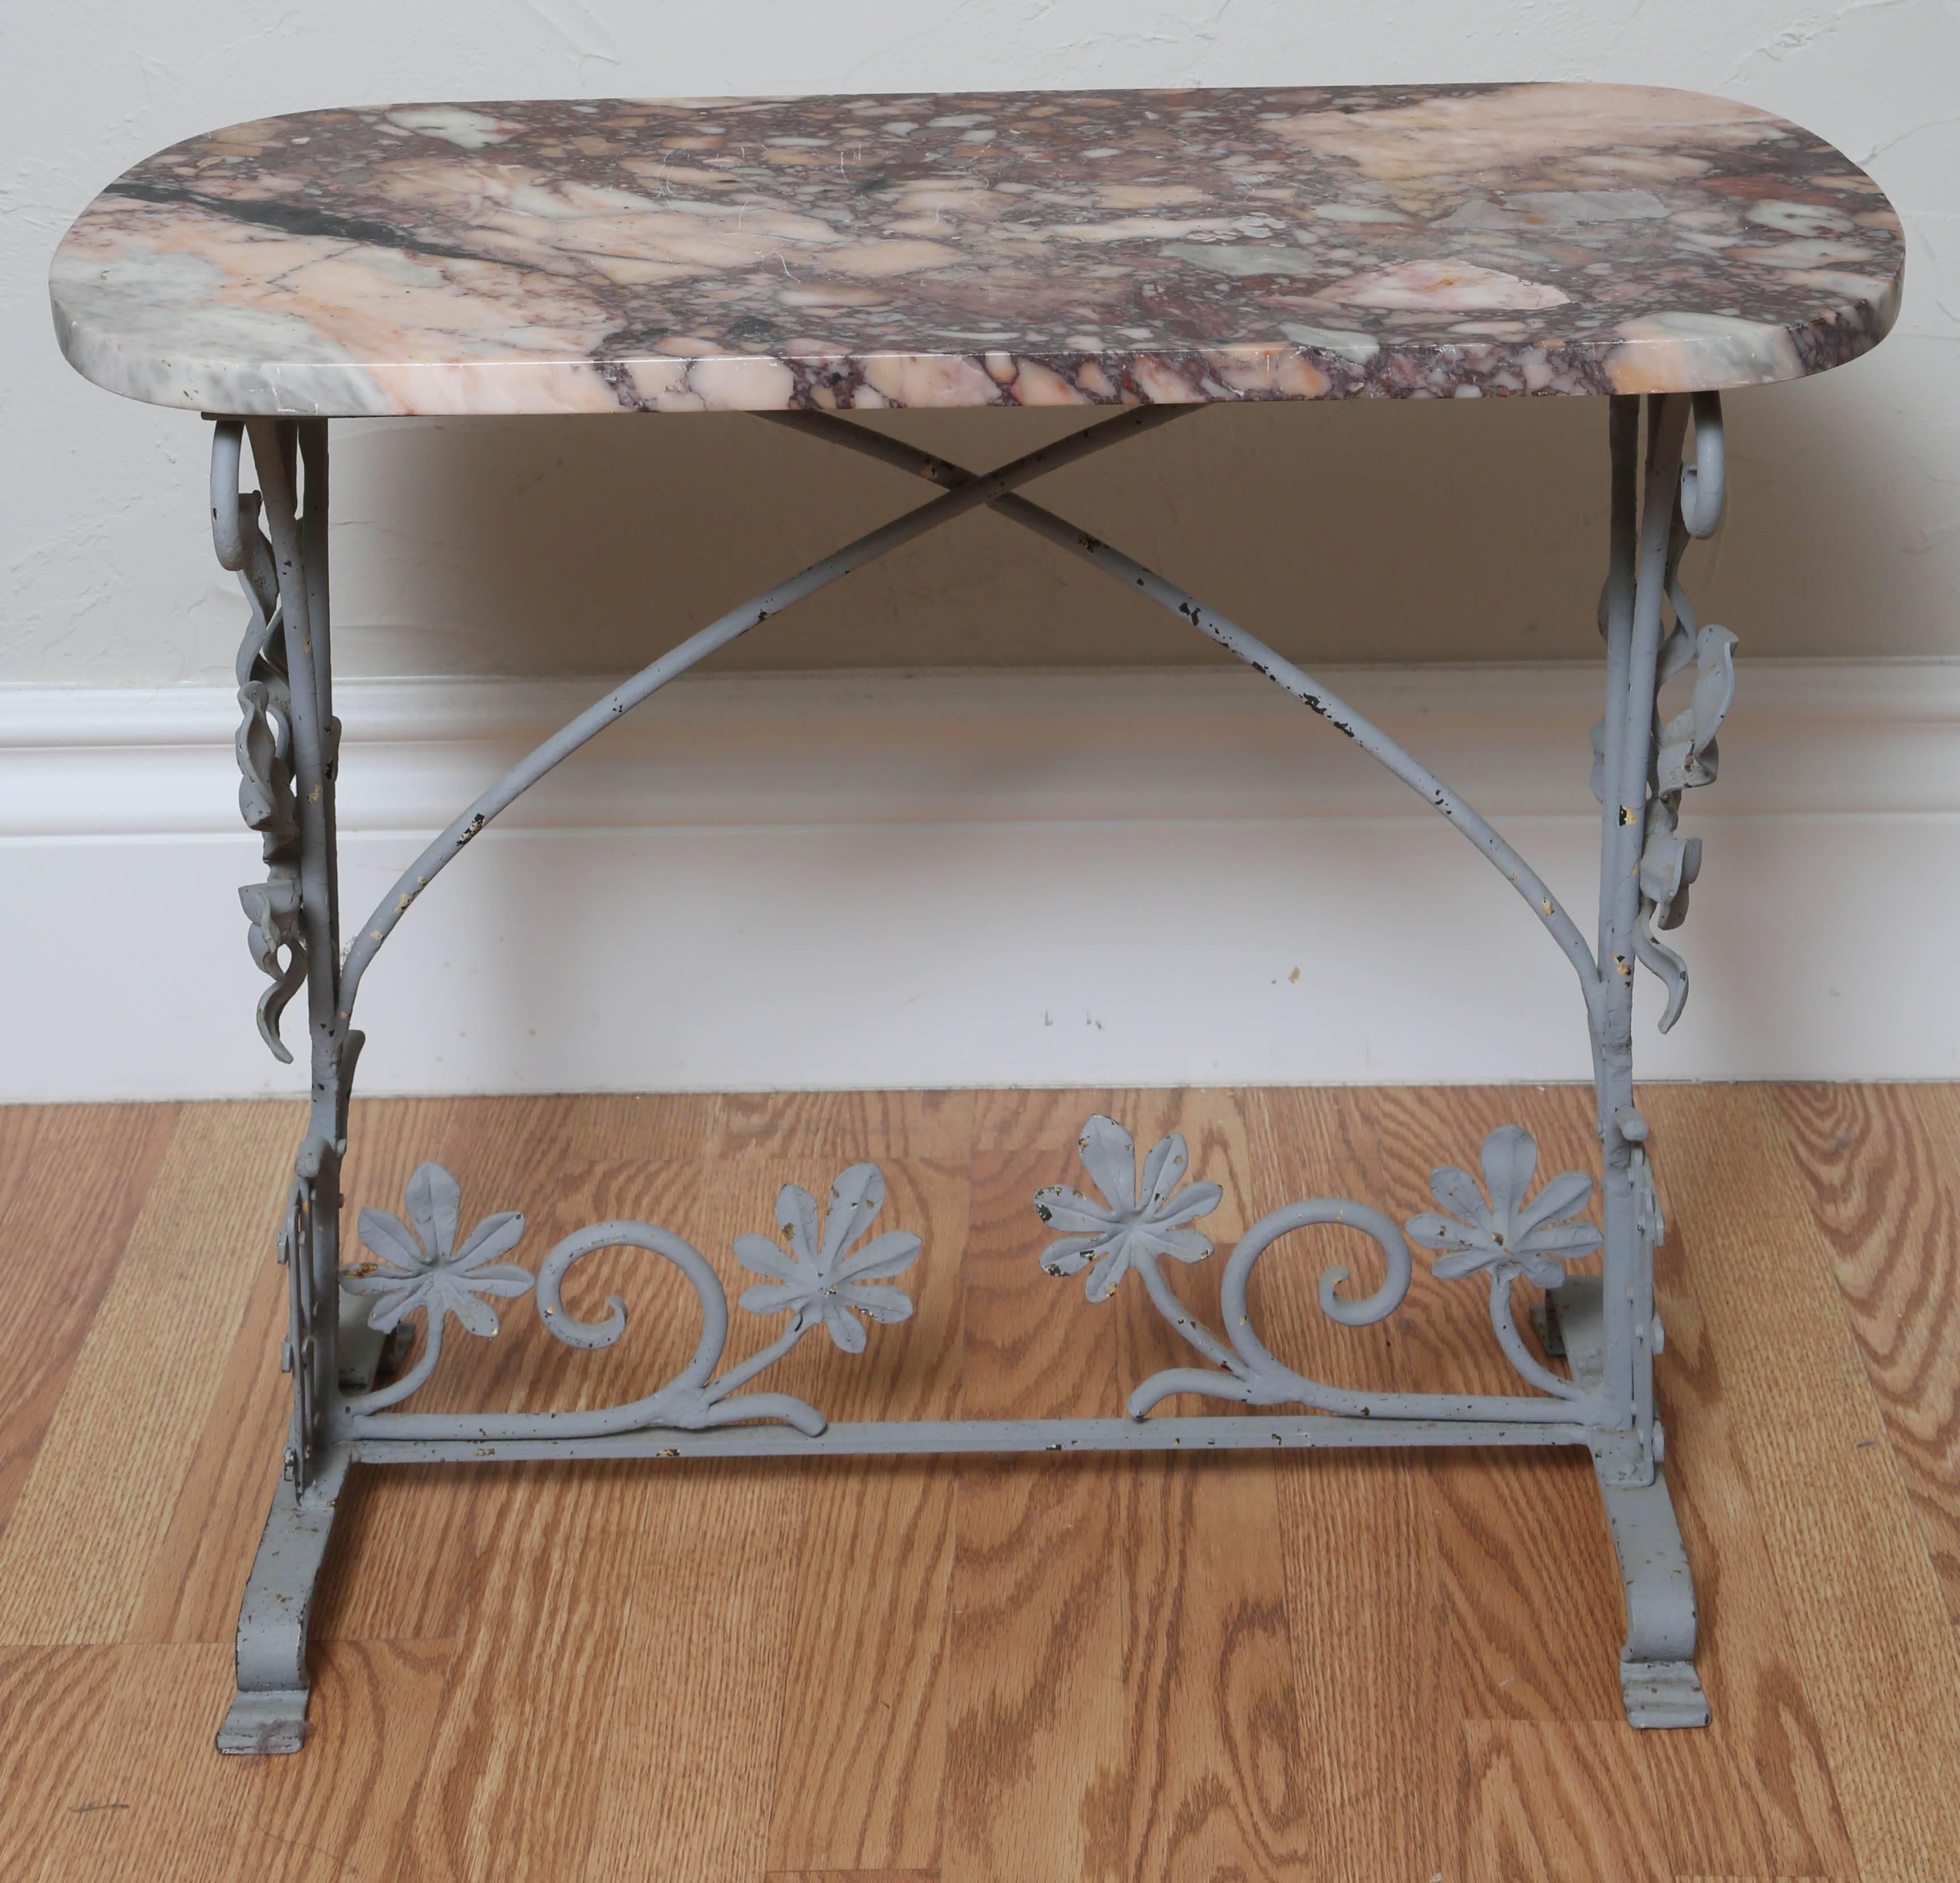 Wrought iron basket motif side table with pink/grey colored marble top.